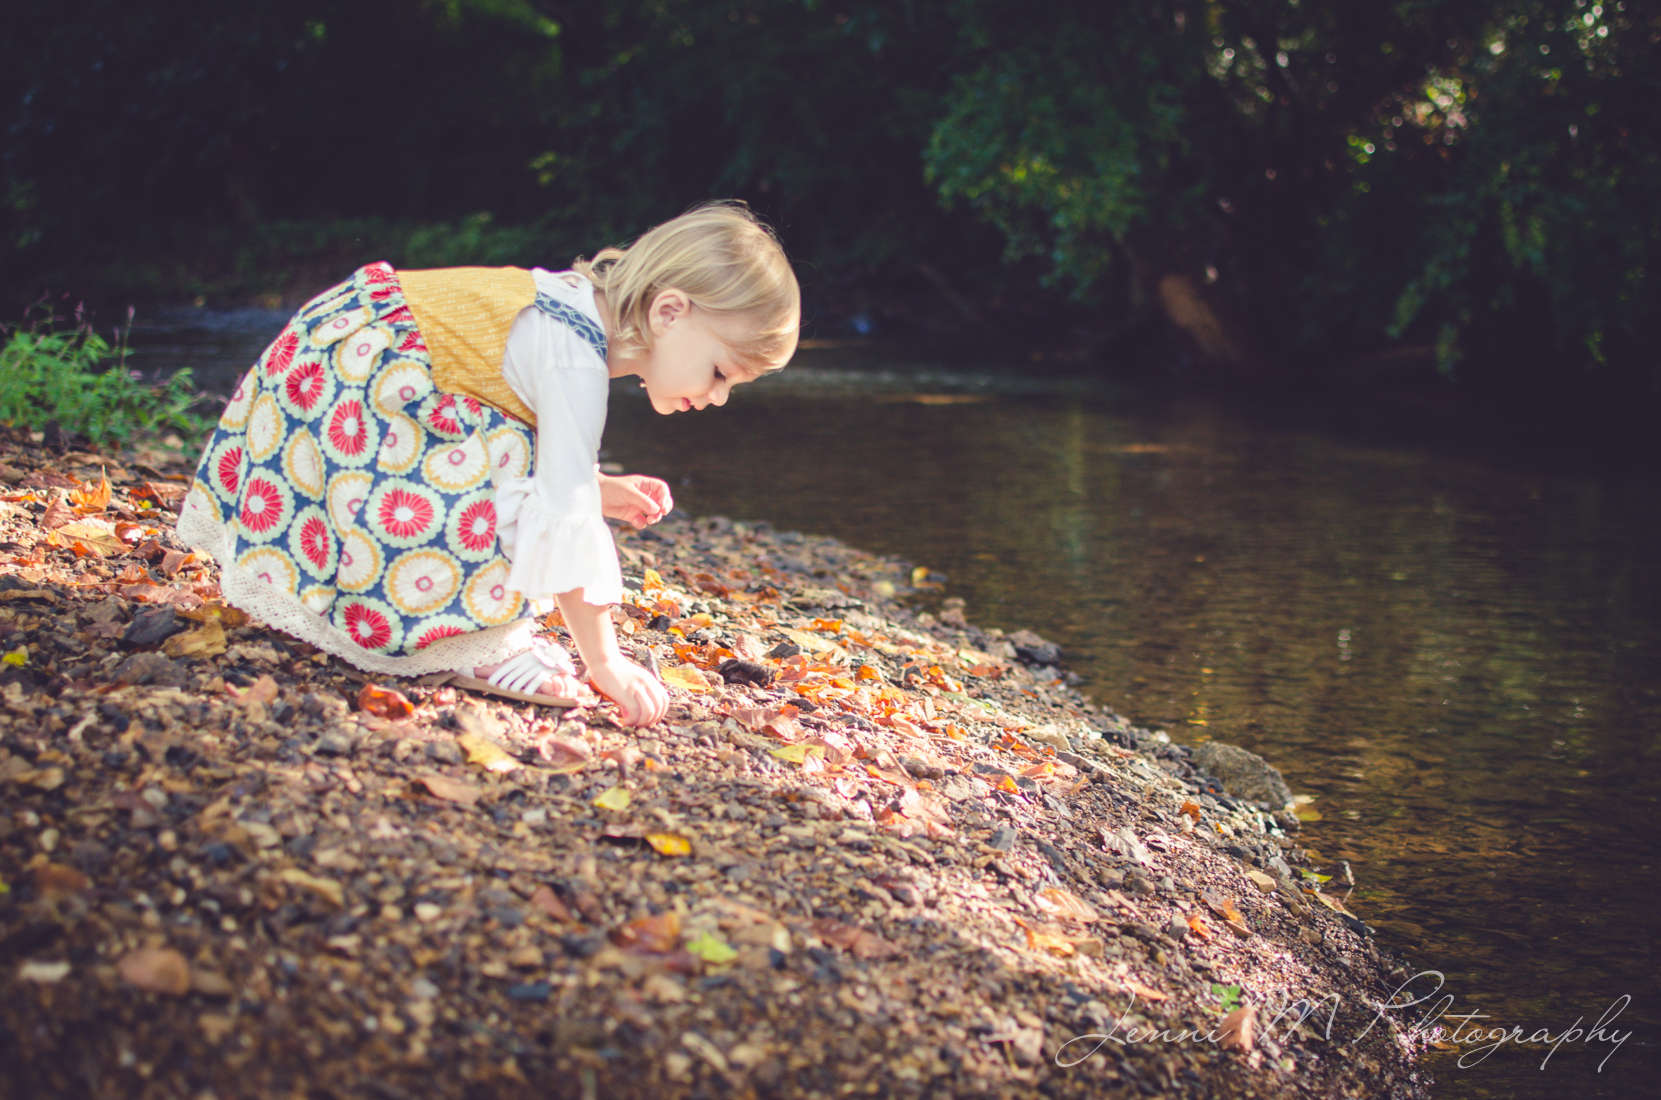 Jenni M Photography 2 year old birthday photography outdoor affordable natural-4